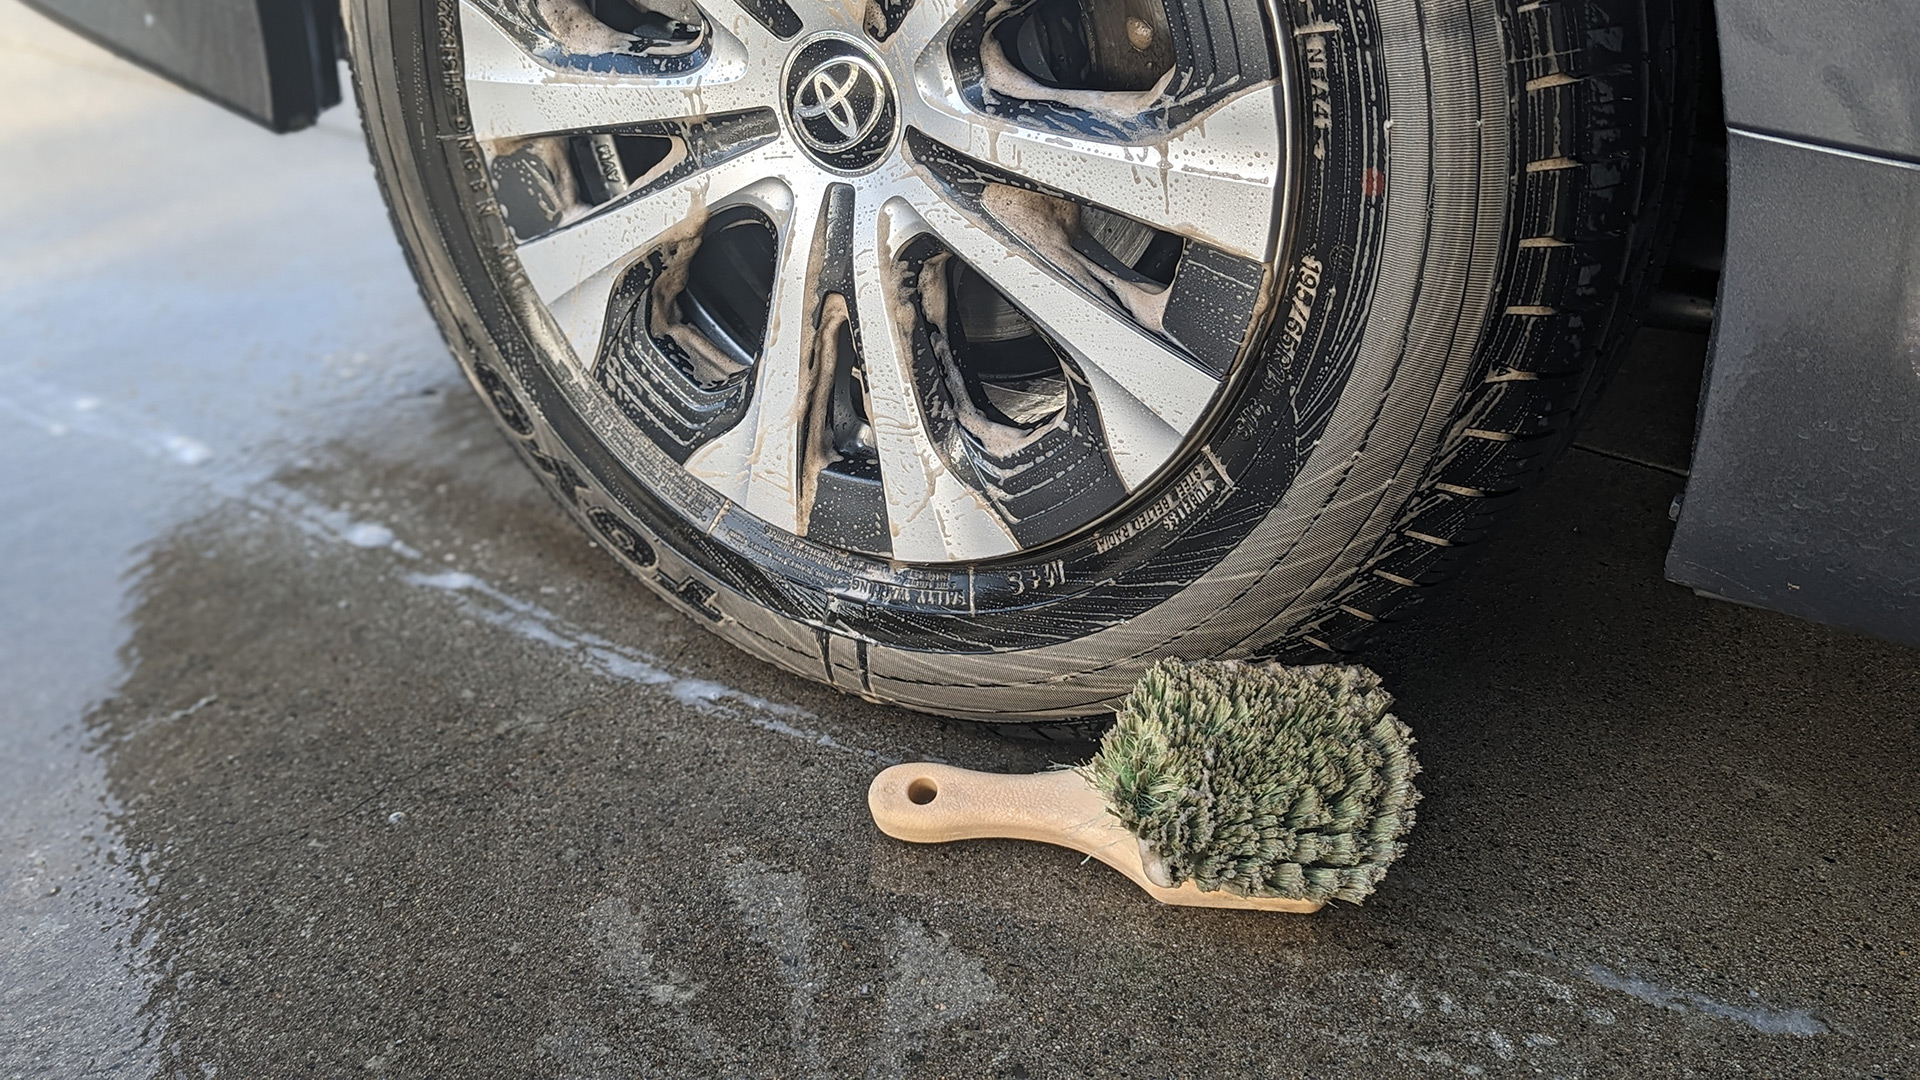 Adam's Wheel Brush Kit - Every Brush You Need to Detail Your Cars Wheels,  Tires, Barrels, and More - Specially Designed Brushes for Every Part of  Your